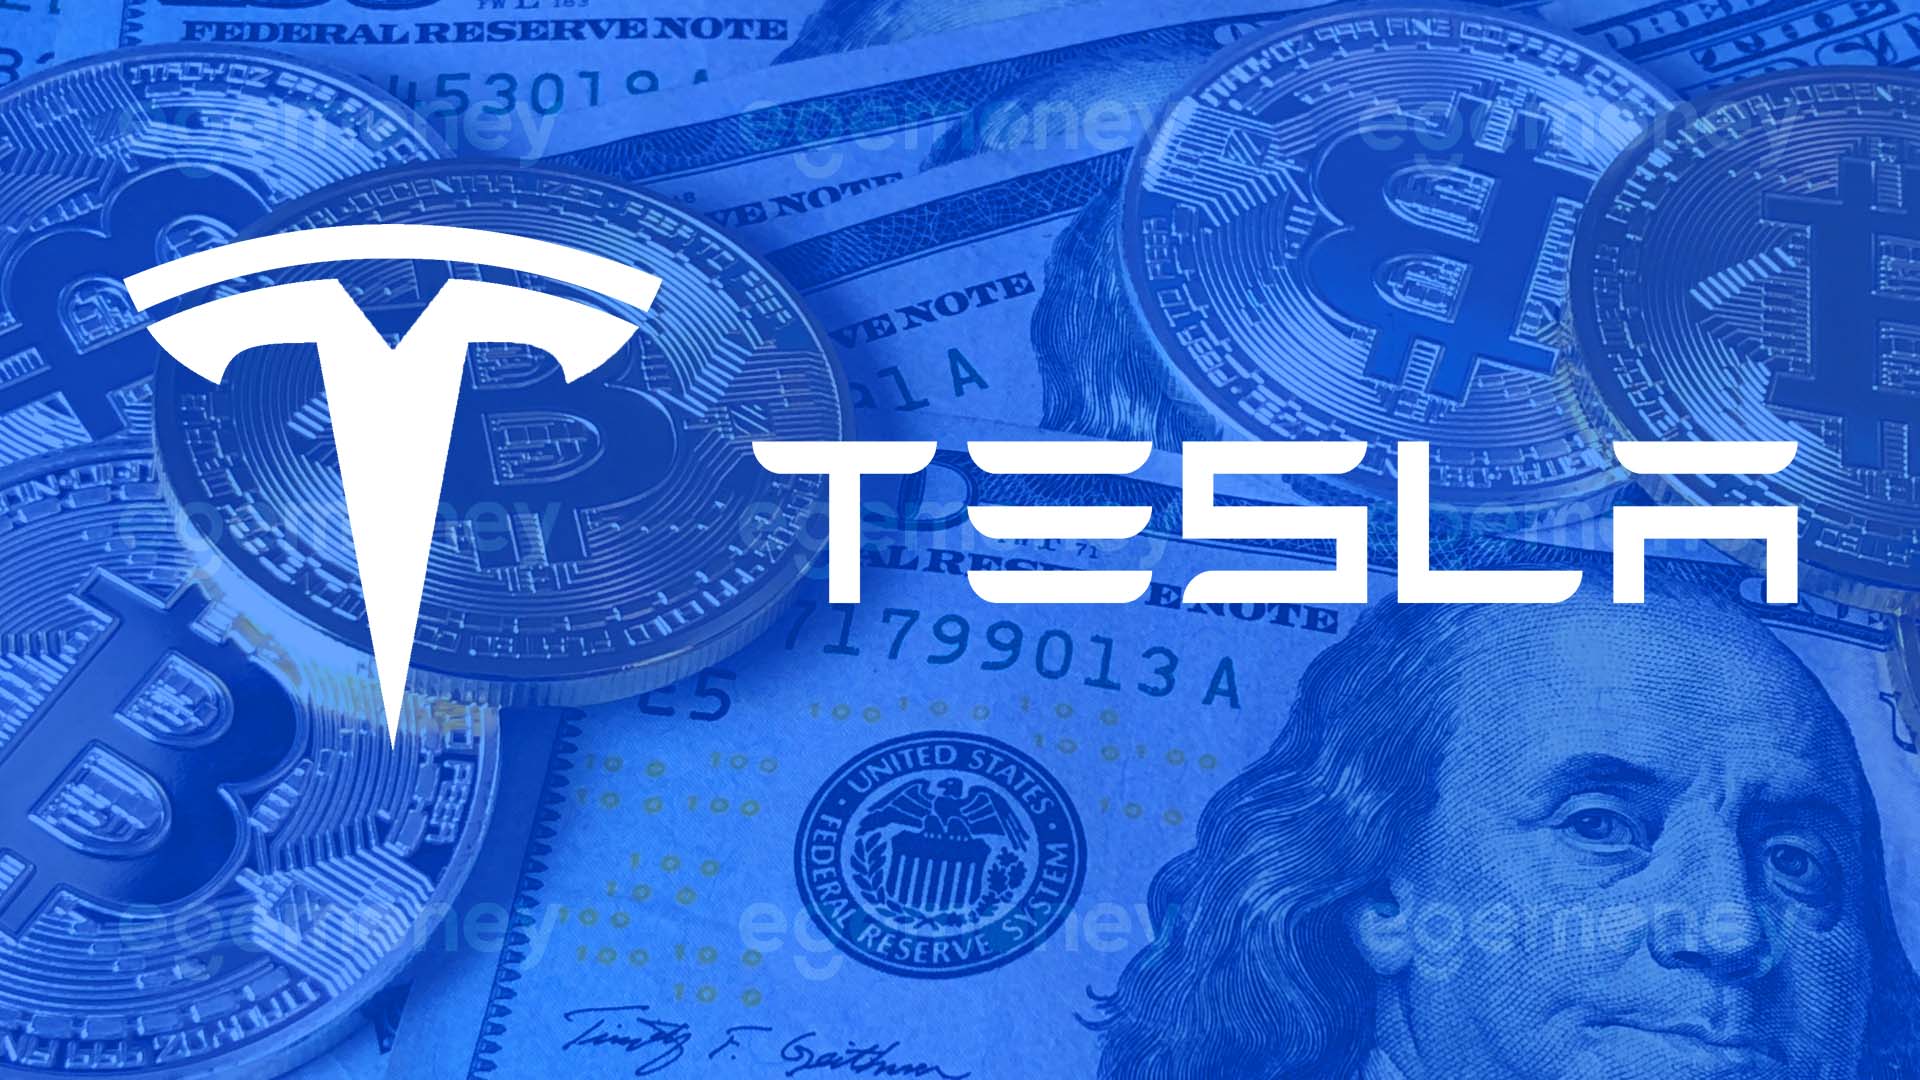 Tesla Focuses on Artificial Intelligence While Holding Bitcoin Assets